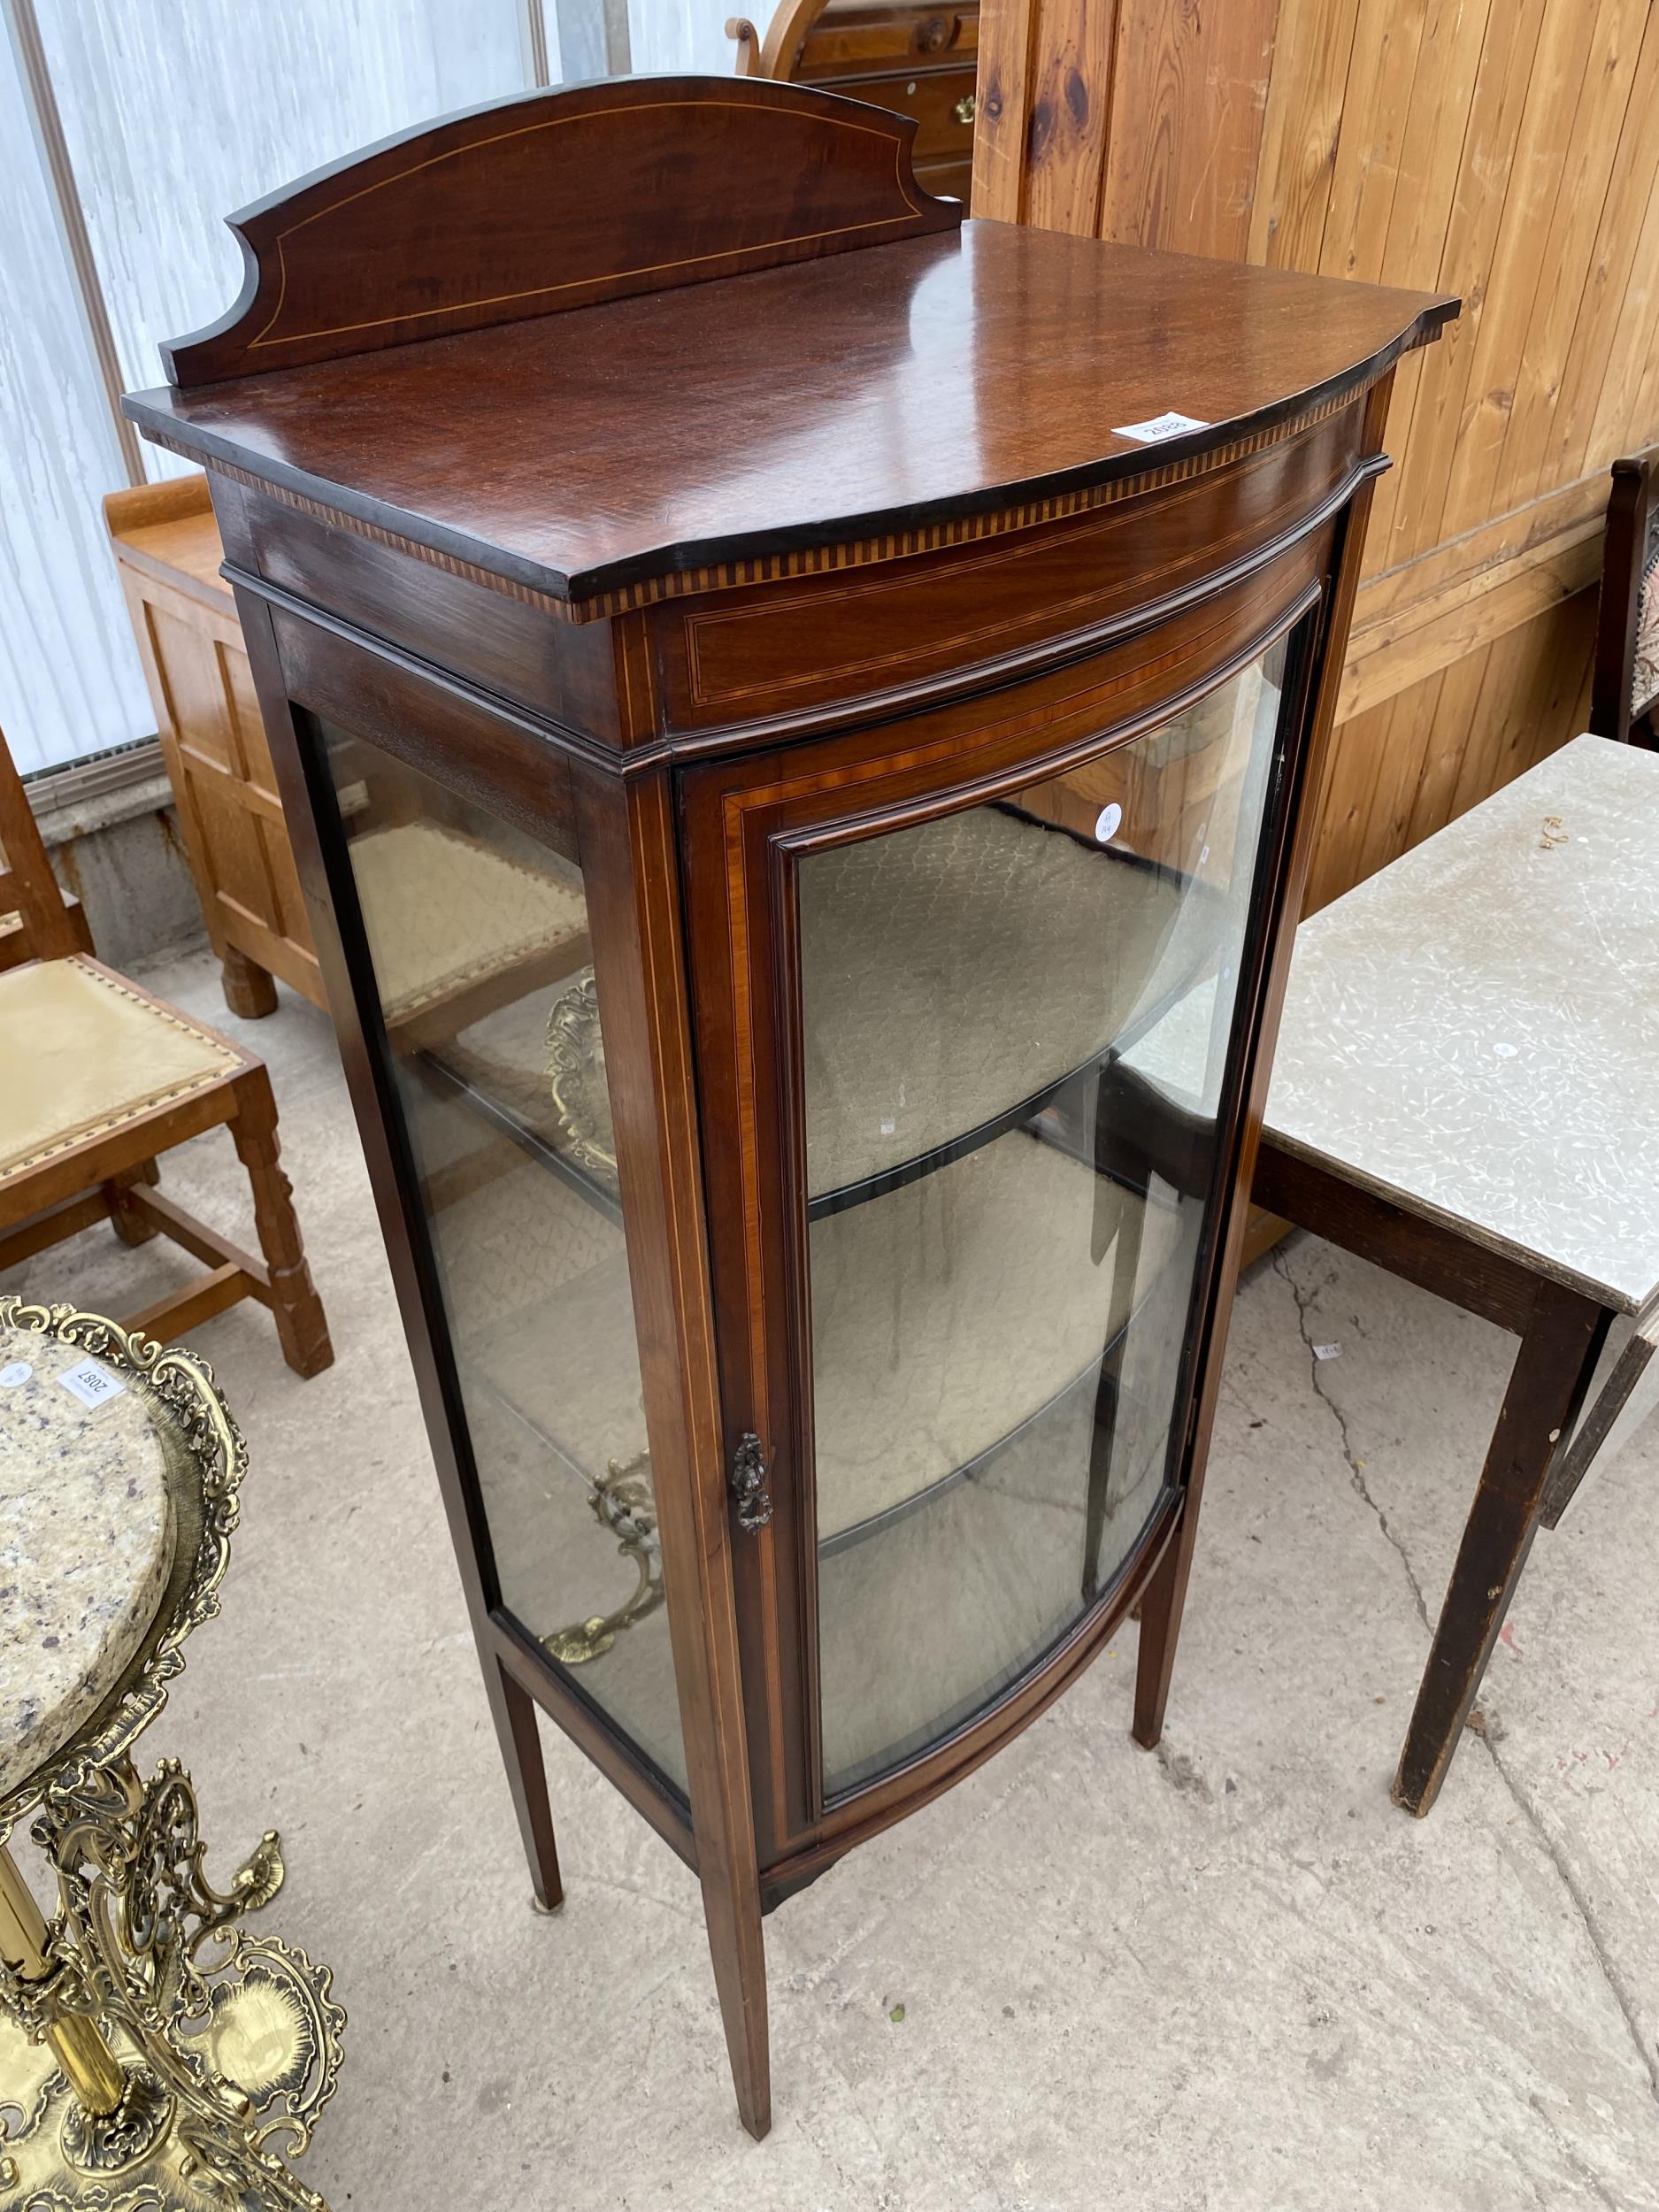 AN EDWARDIAN MAHOGANY AND INLAID BOWFRONTED DISPLAY CABINET, 23" WIDE